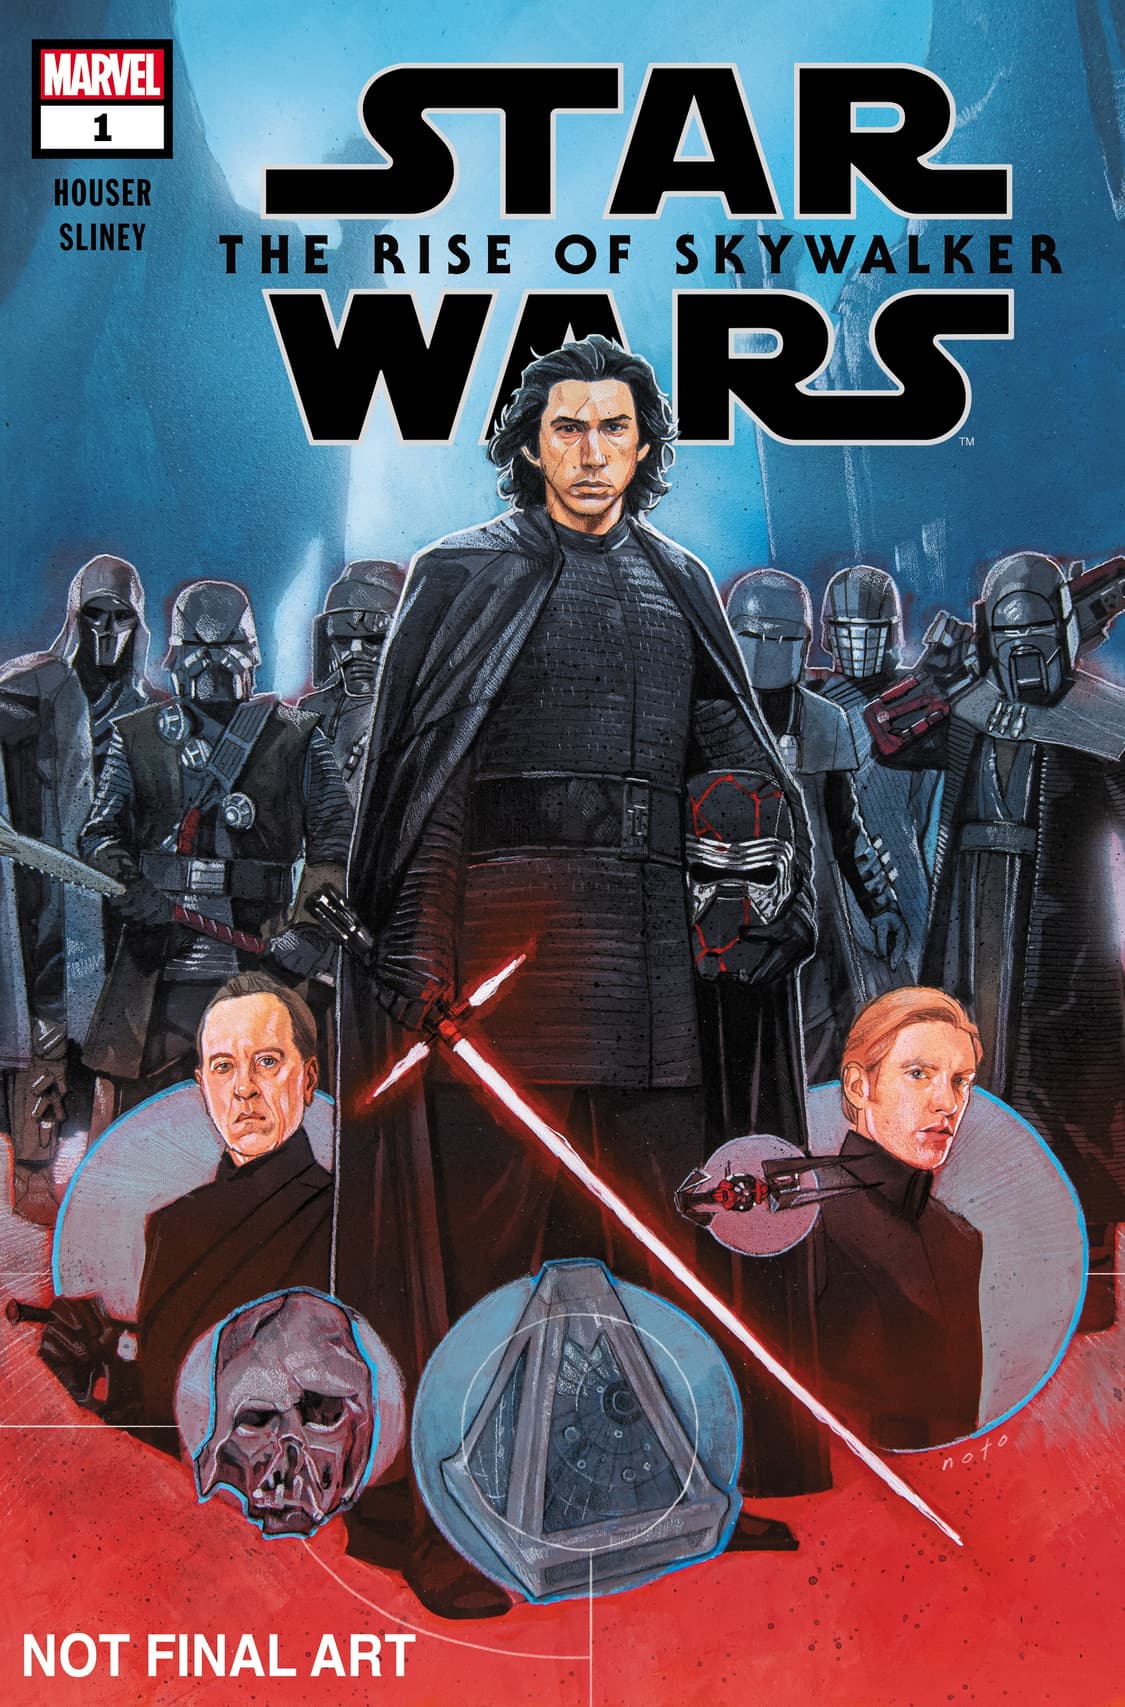 STAR WARS: THE RISE OF SKYWALKER ADAPTATION #1 cover preview by Phil Noto